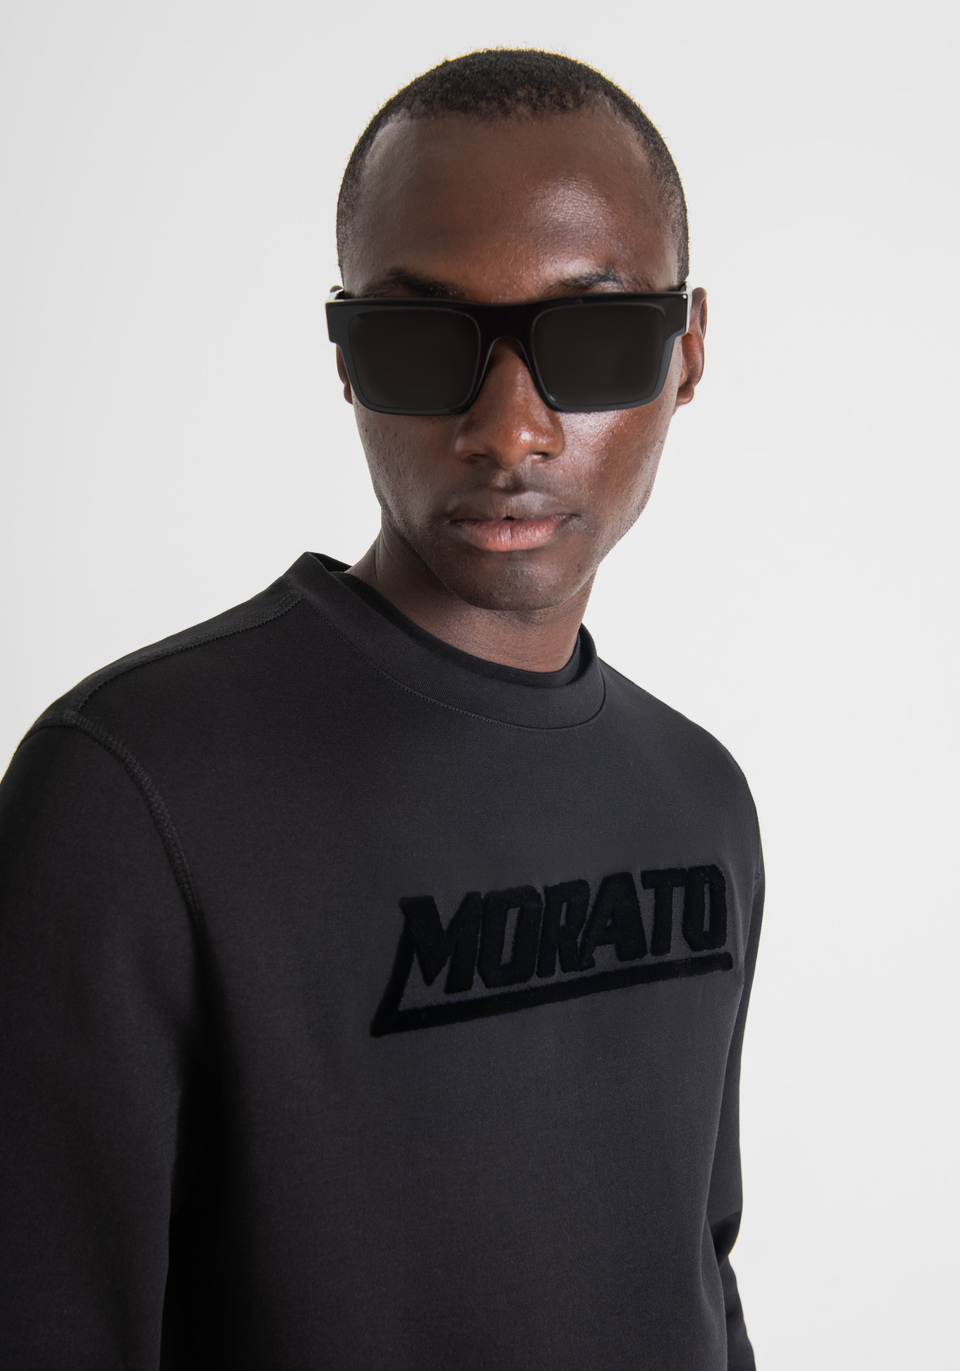 REGULAR-FIT CREW-NECK SWEATSHIRT IN COTTON BLEND WITH EMBROIDERED LOGO ON THE CHEST - Antony Morato Online Shop